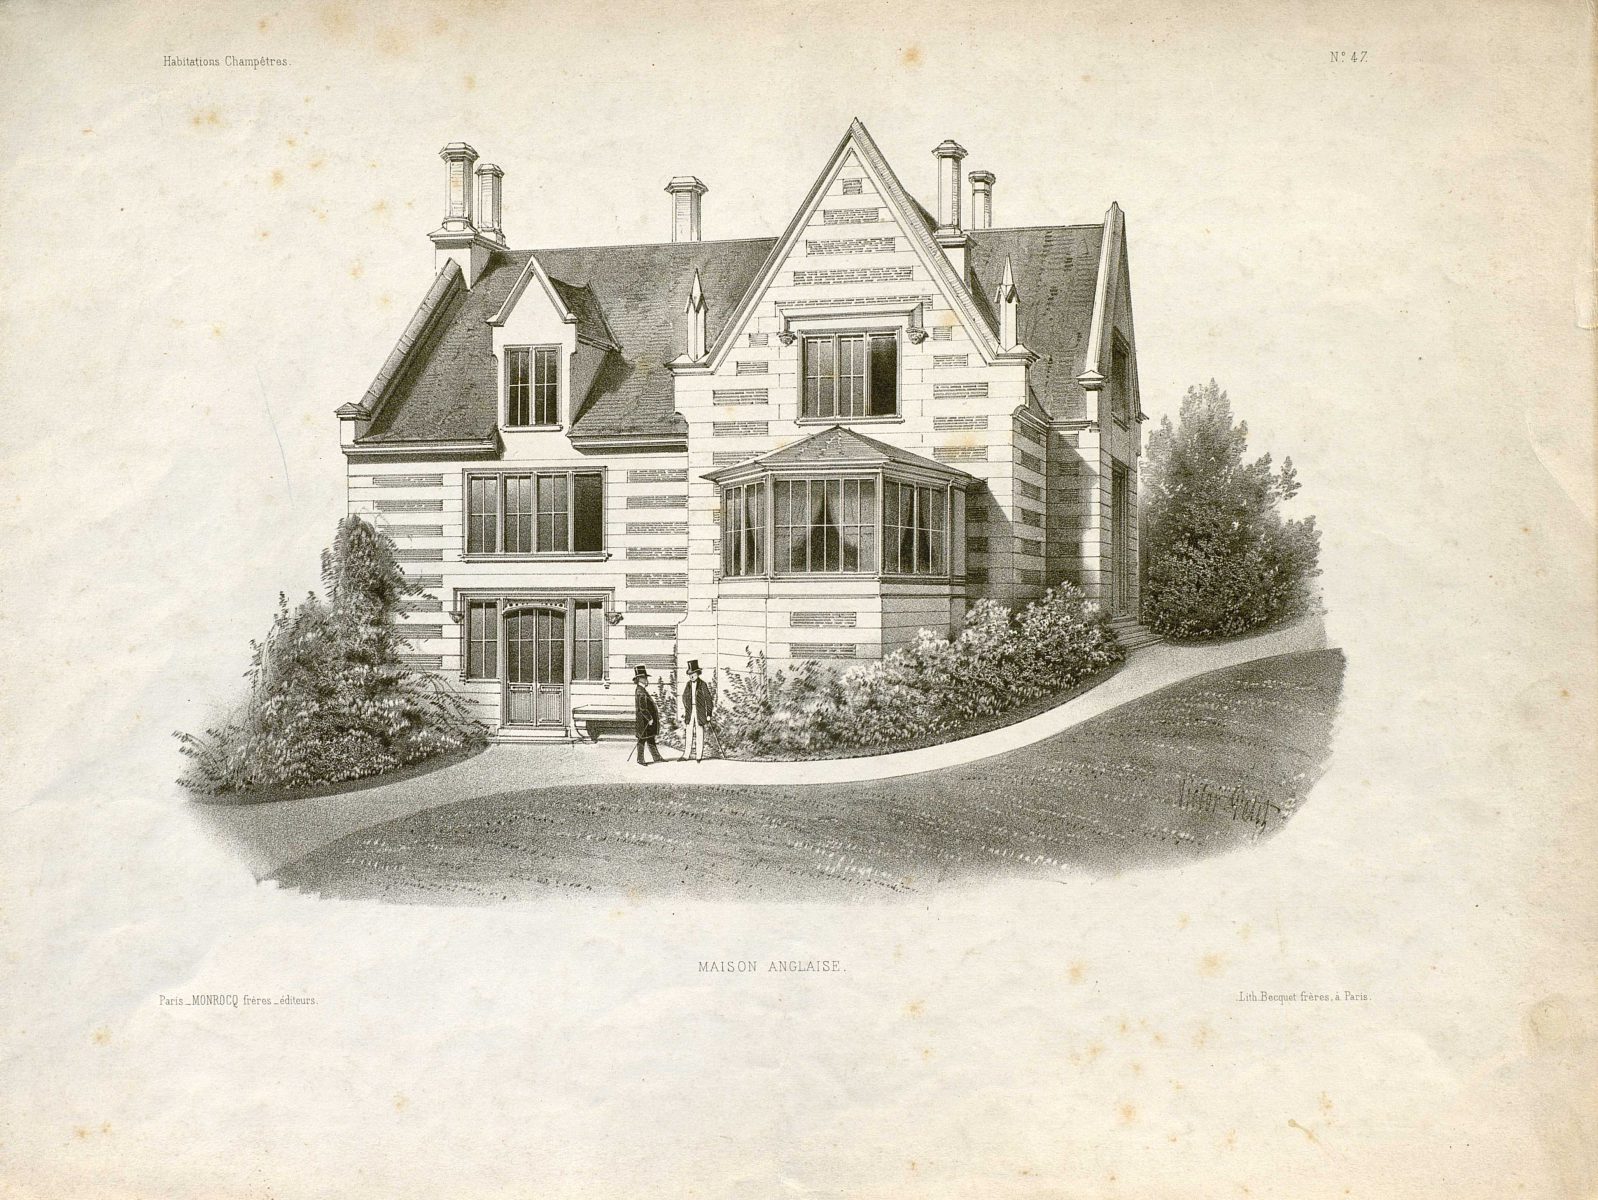 English house. Plate taken from “Habitations champêtres” by A. Petit